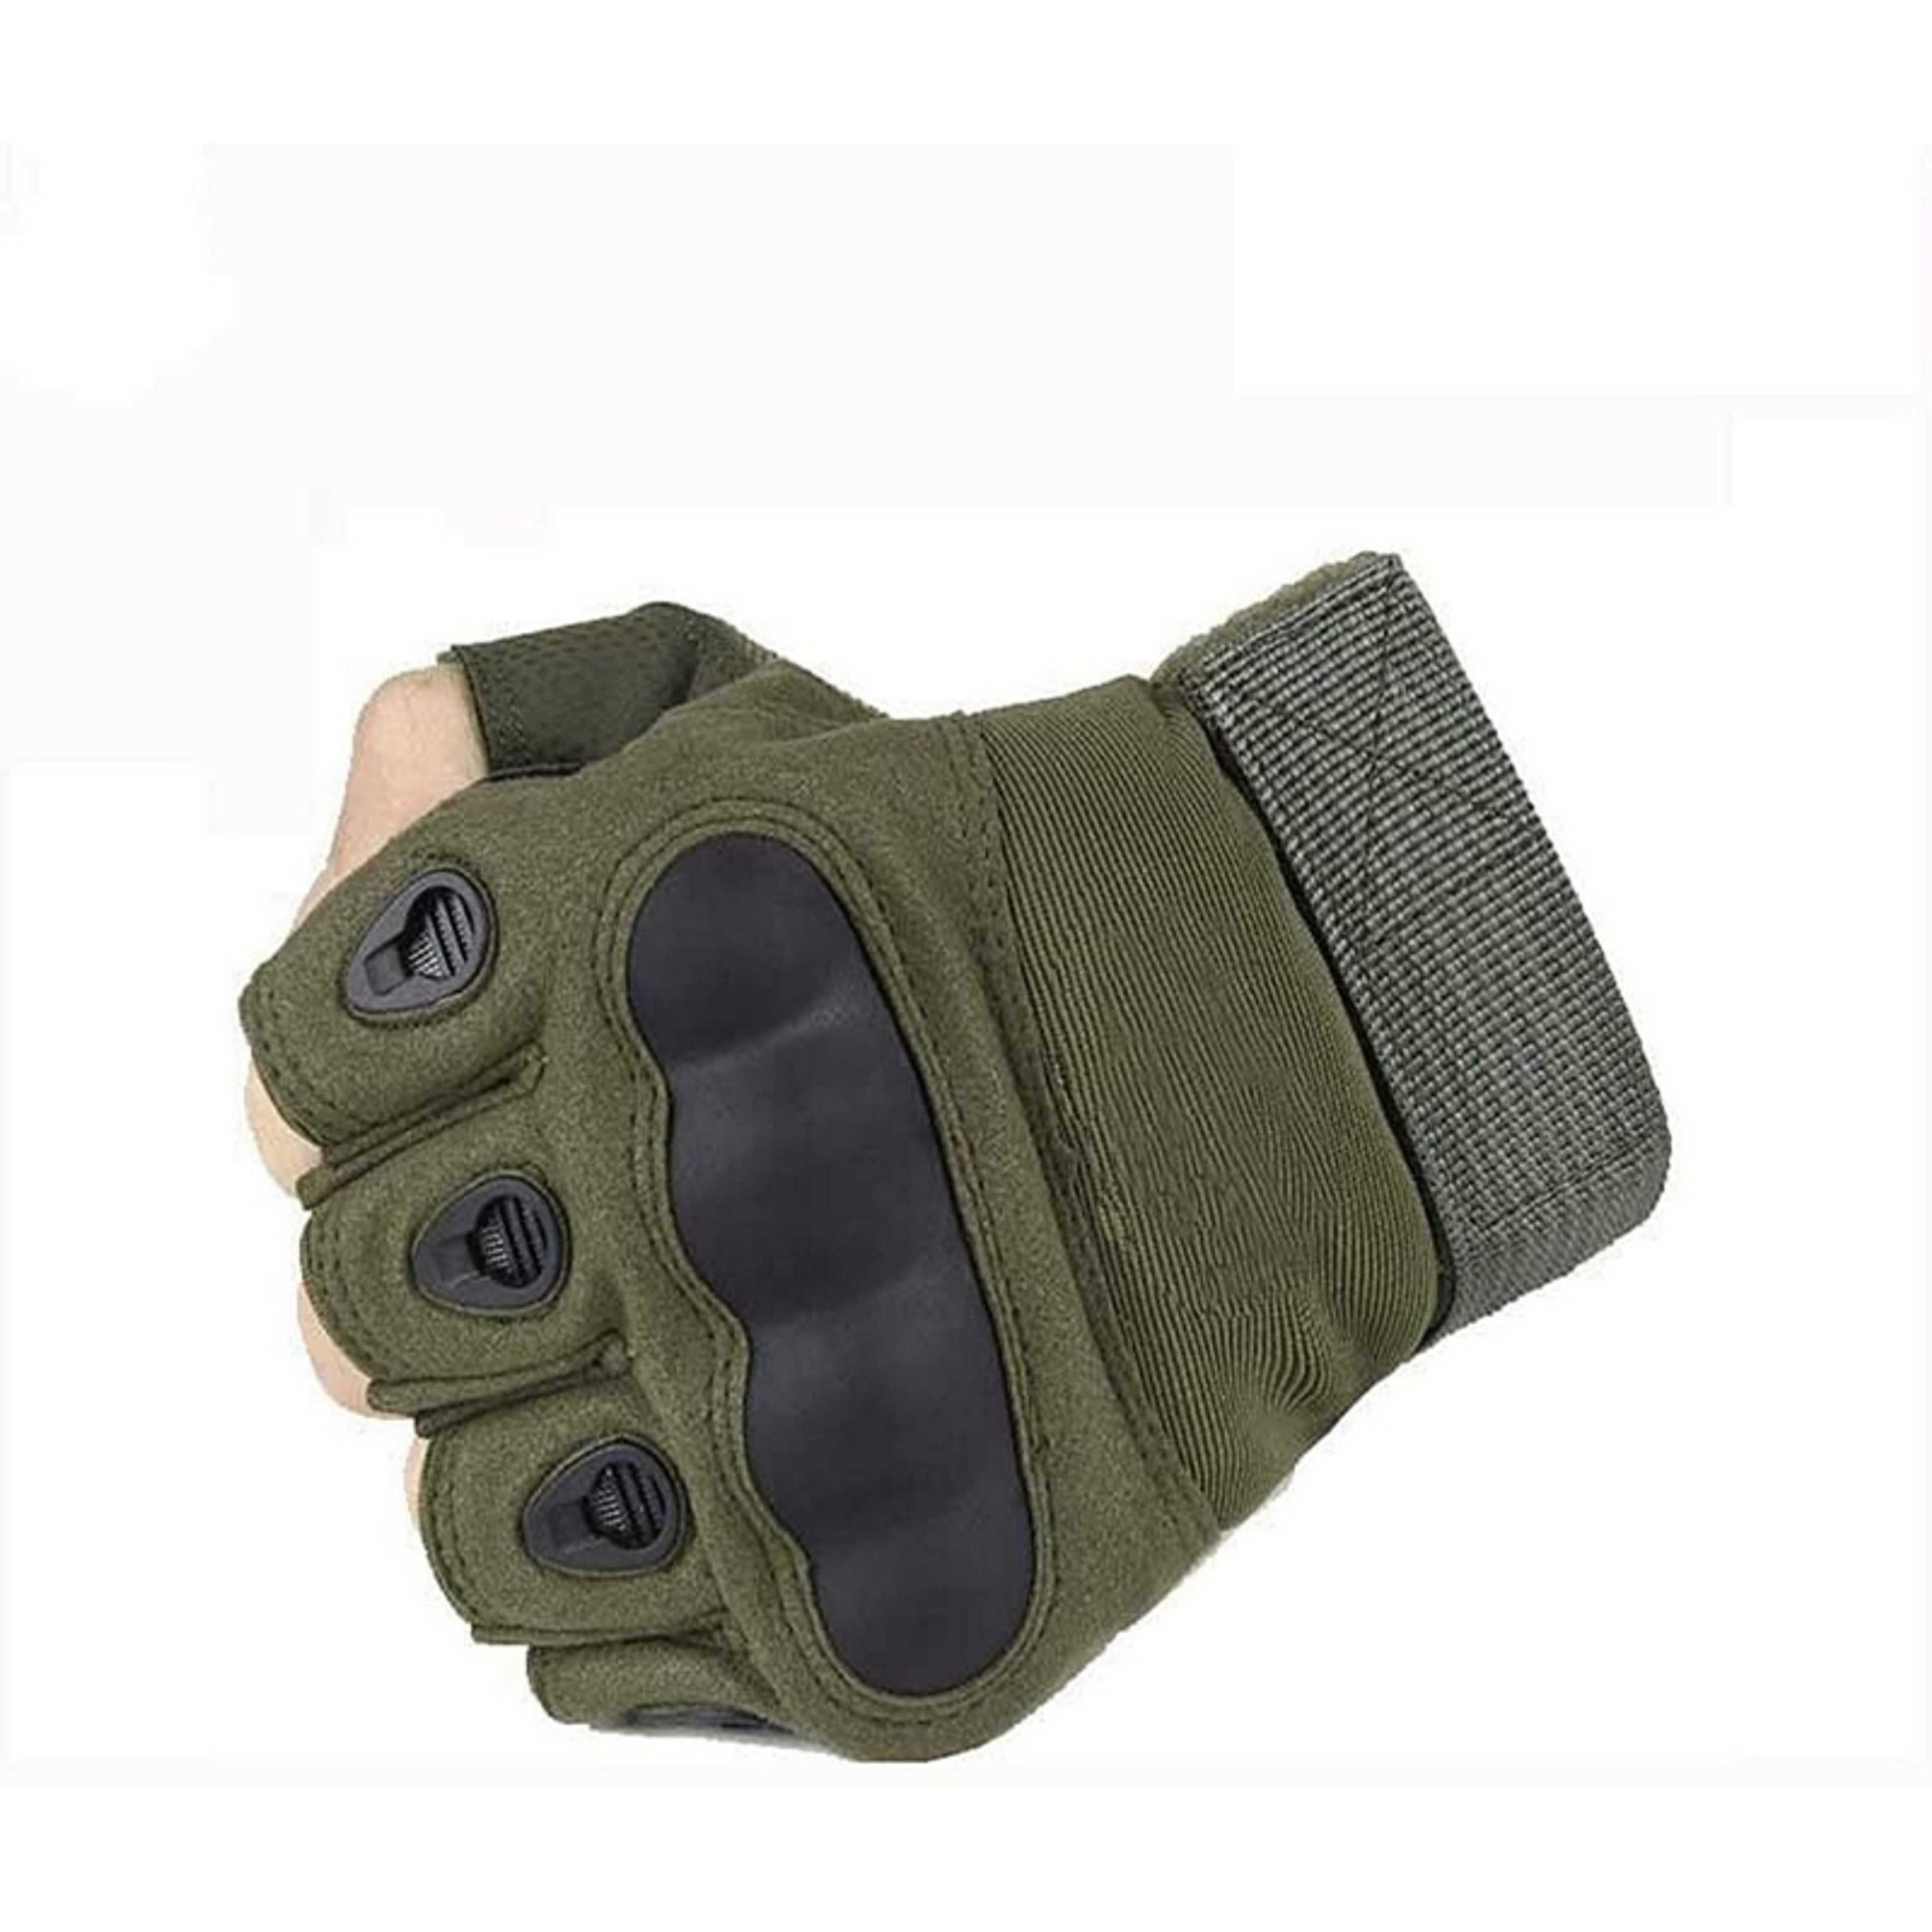 ALL PURPOSE HIKING CYCLING GLOVES - HALF FINGER - 1 PAIR Green